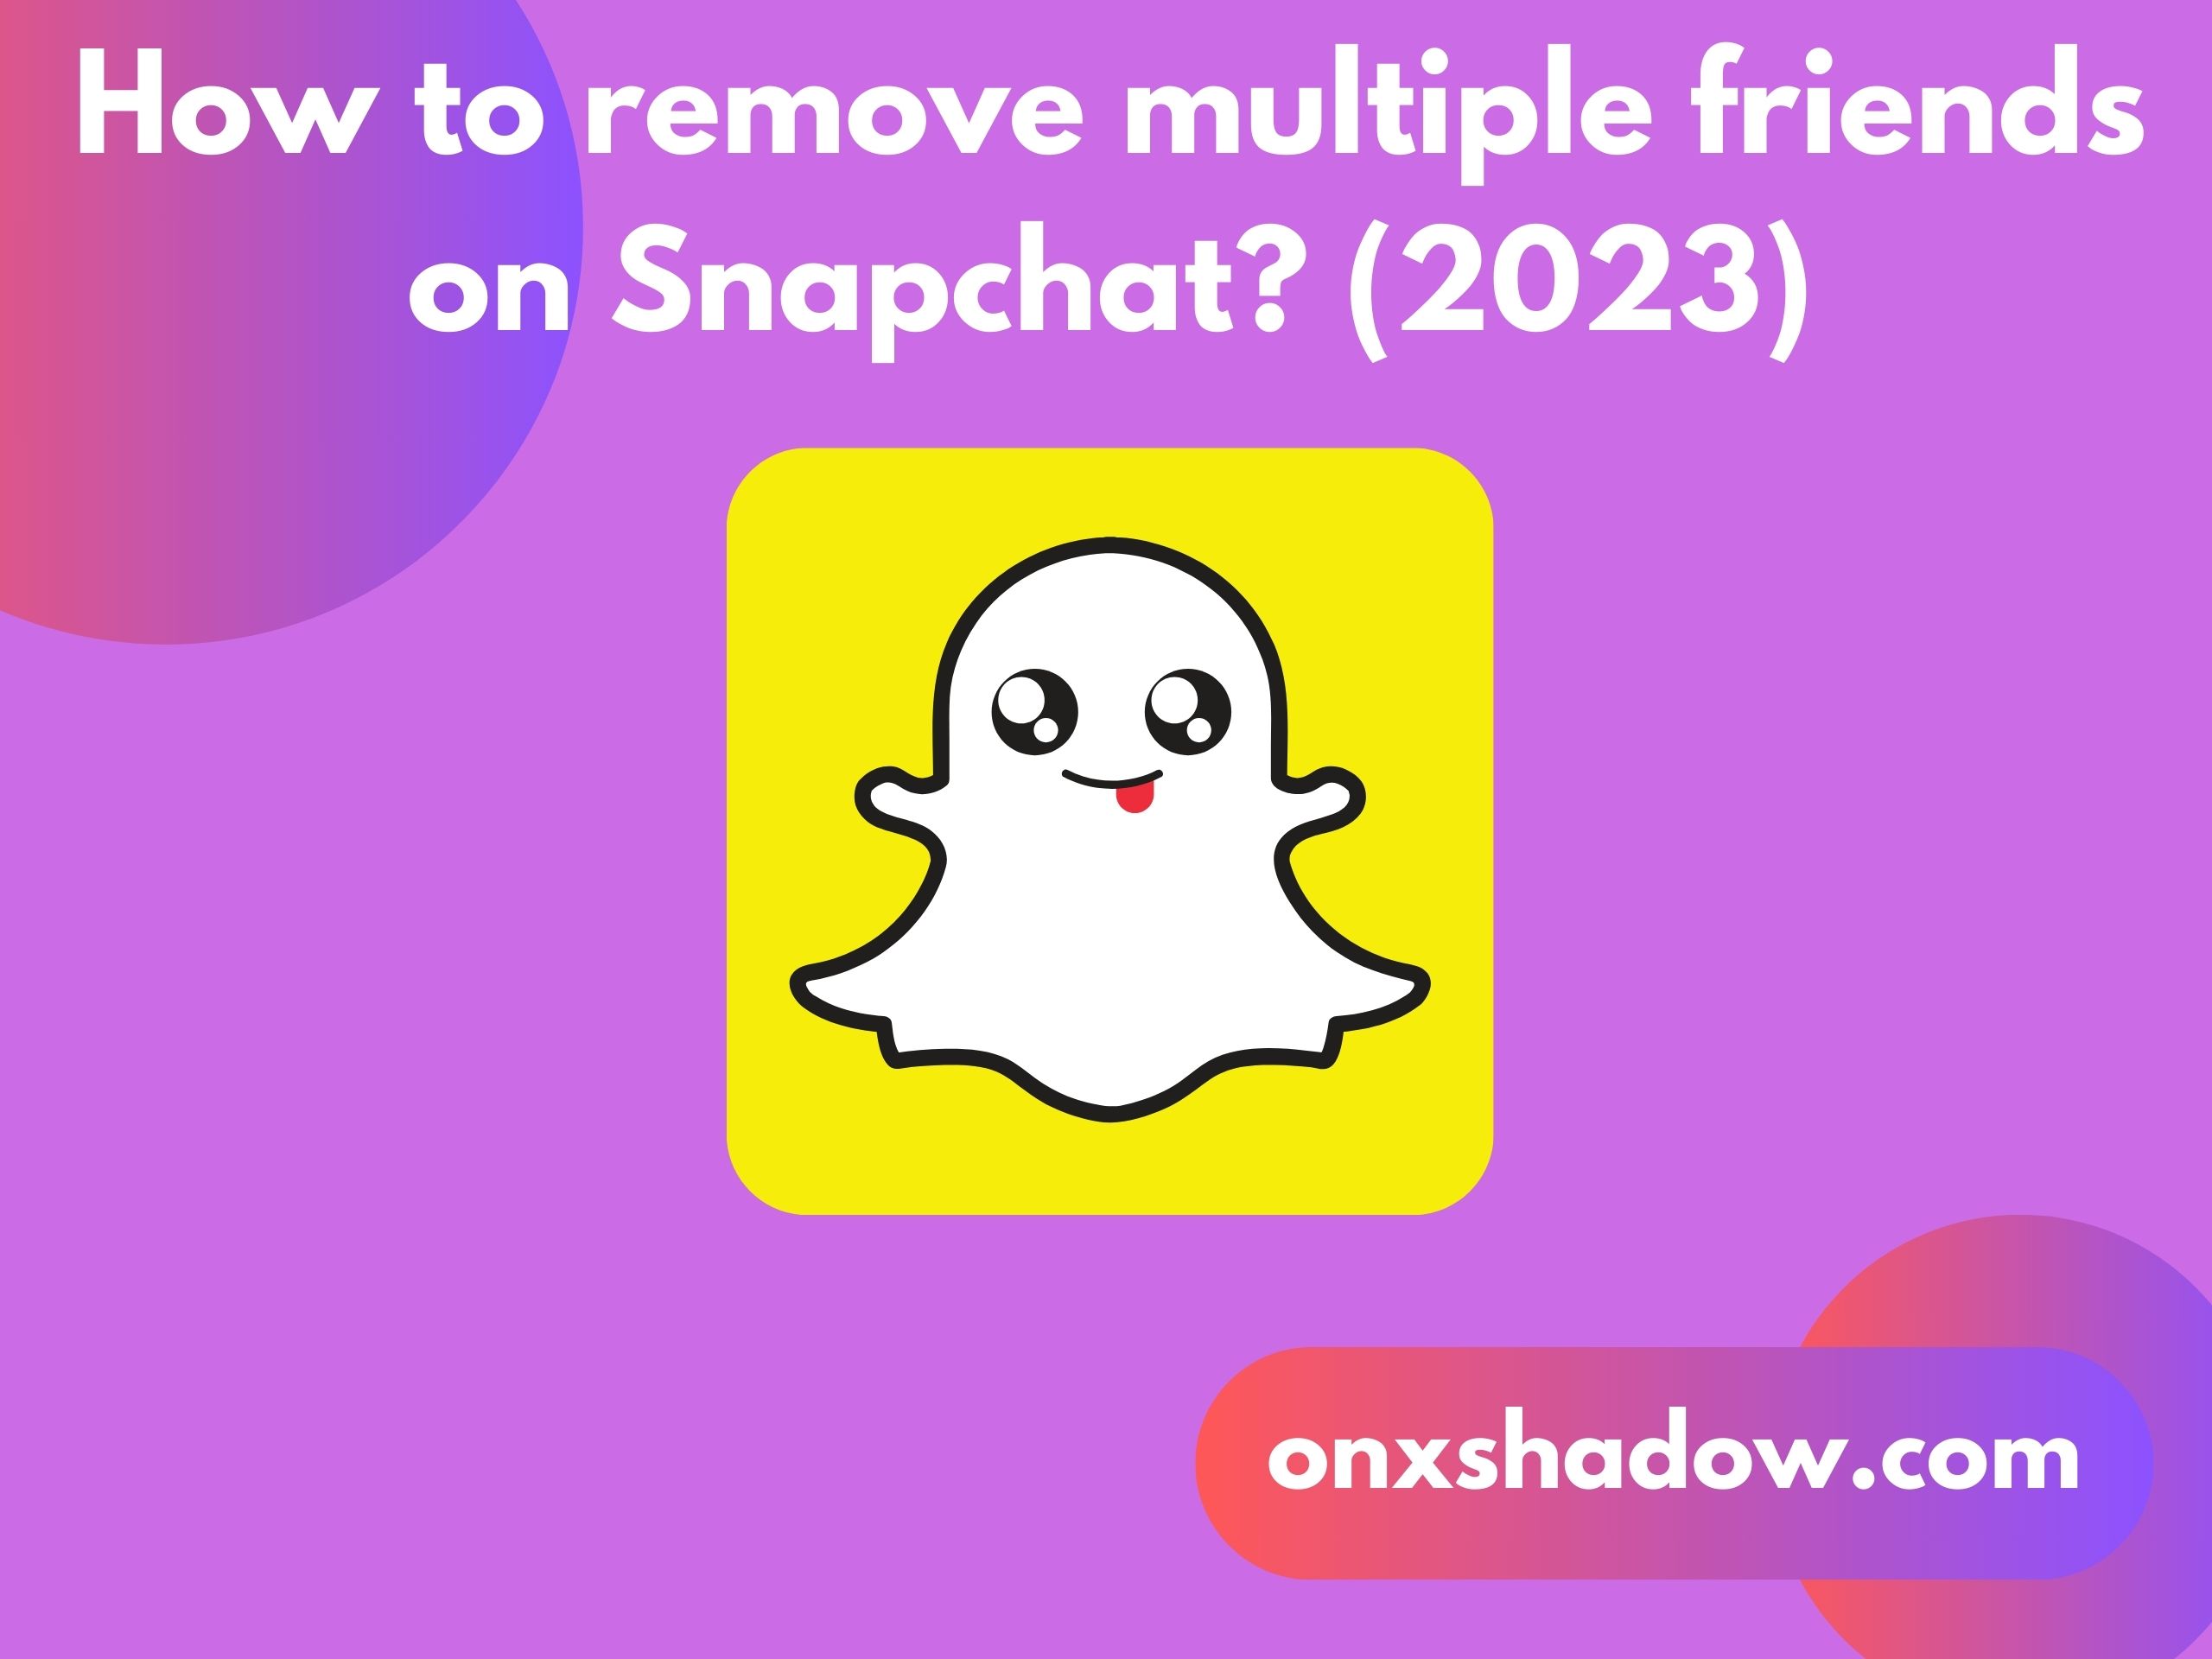 How to remove multiple friends on Snapchat? (2023)